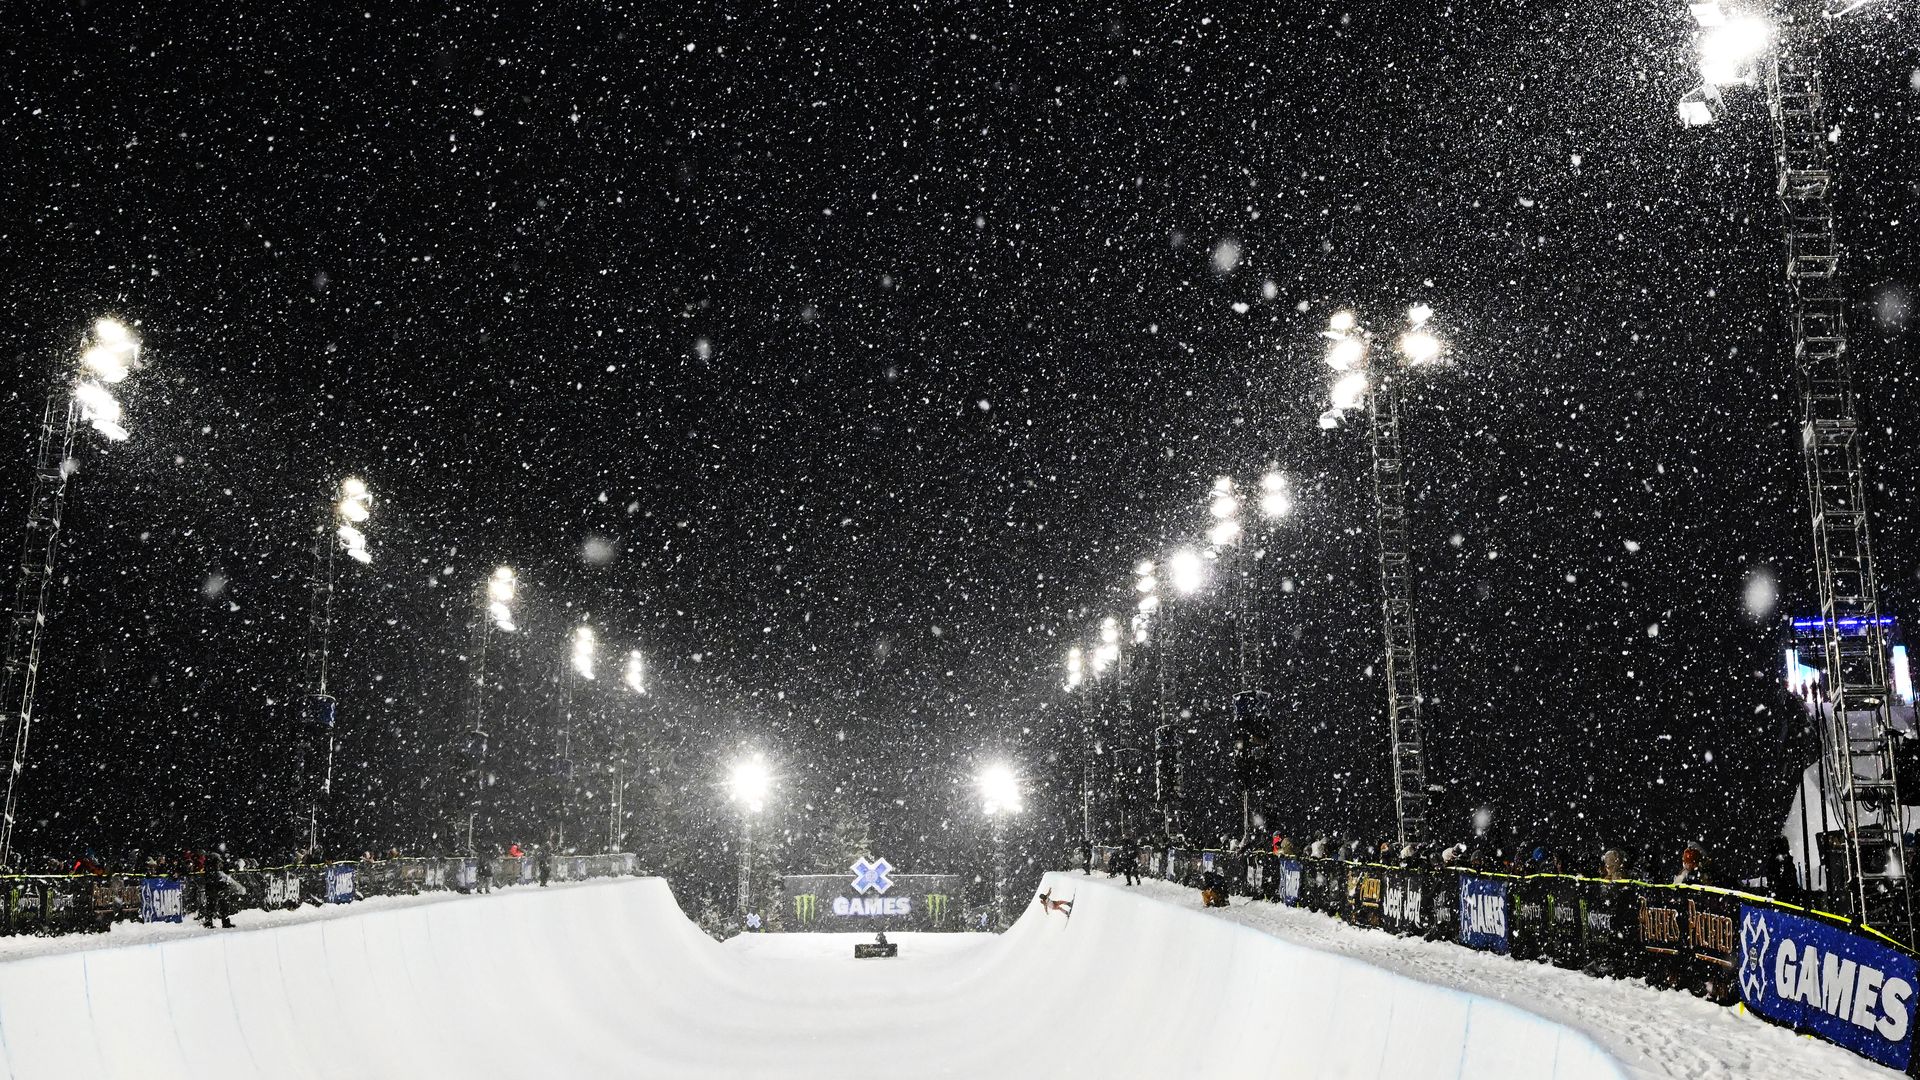 The superpipe at the 2023 X Games on Buttermilk Mountain in Aspen. Photo: RJ Sangosti/Denver Post via Getty Images